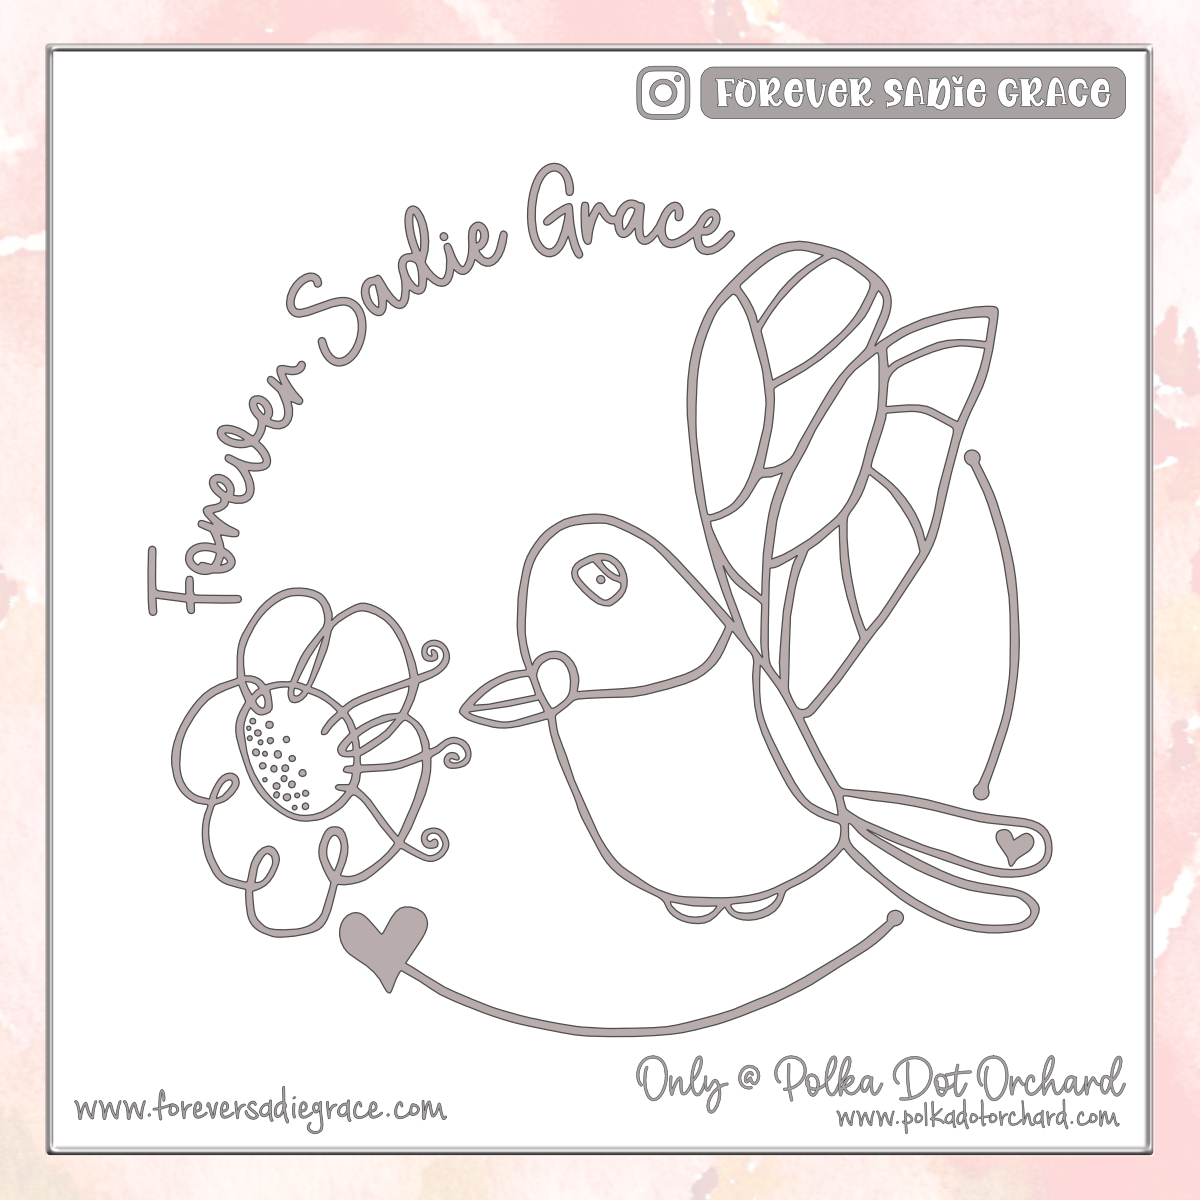 Construction Coloring Posters - Sadie's Stitchery